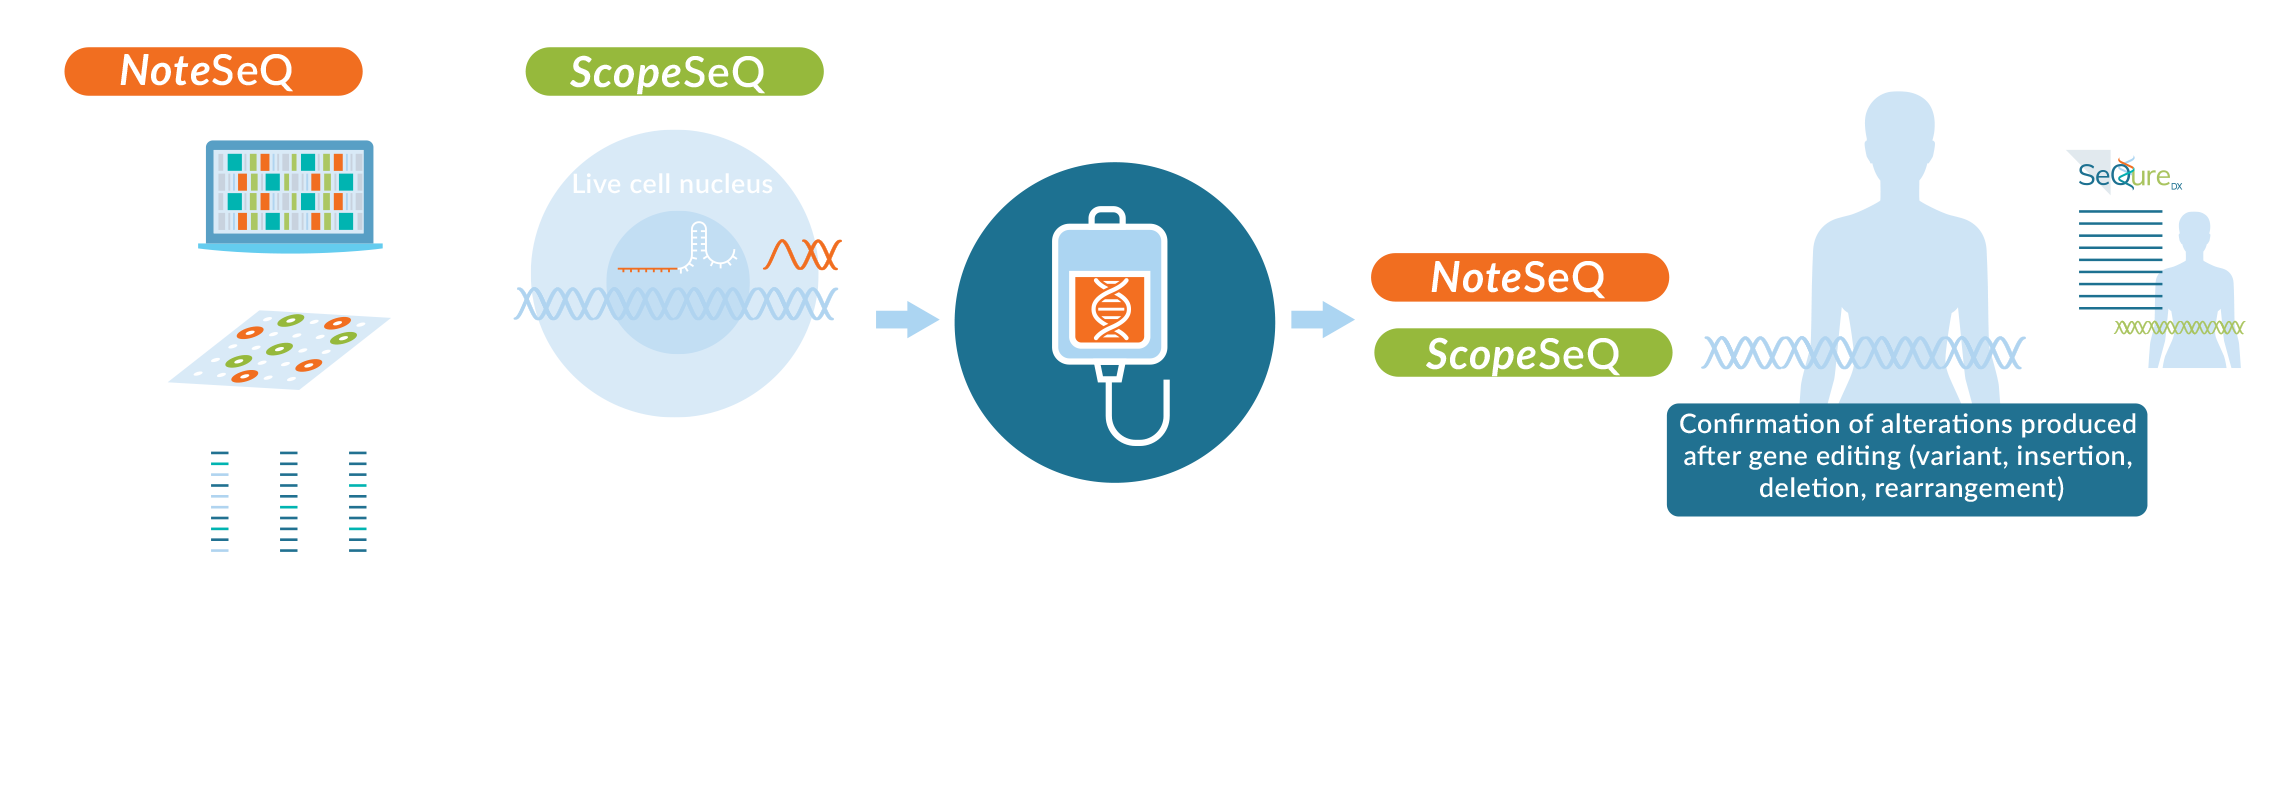 OneSeq Infographic showing process of using NoteSeq and ScopeSeq